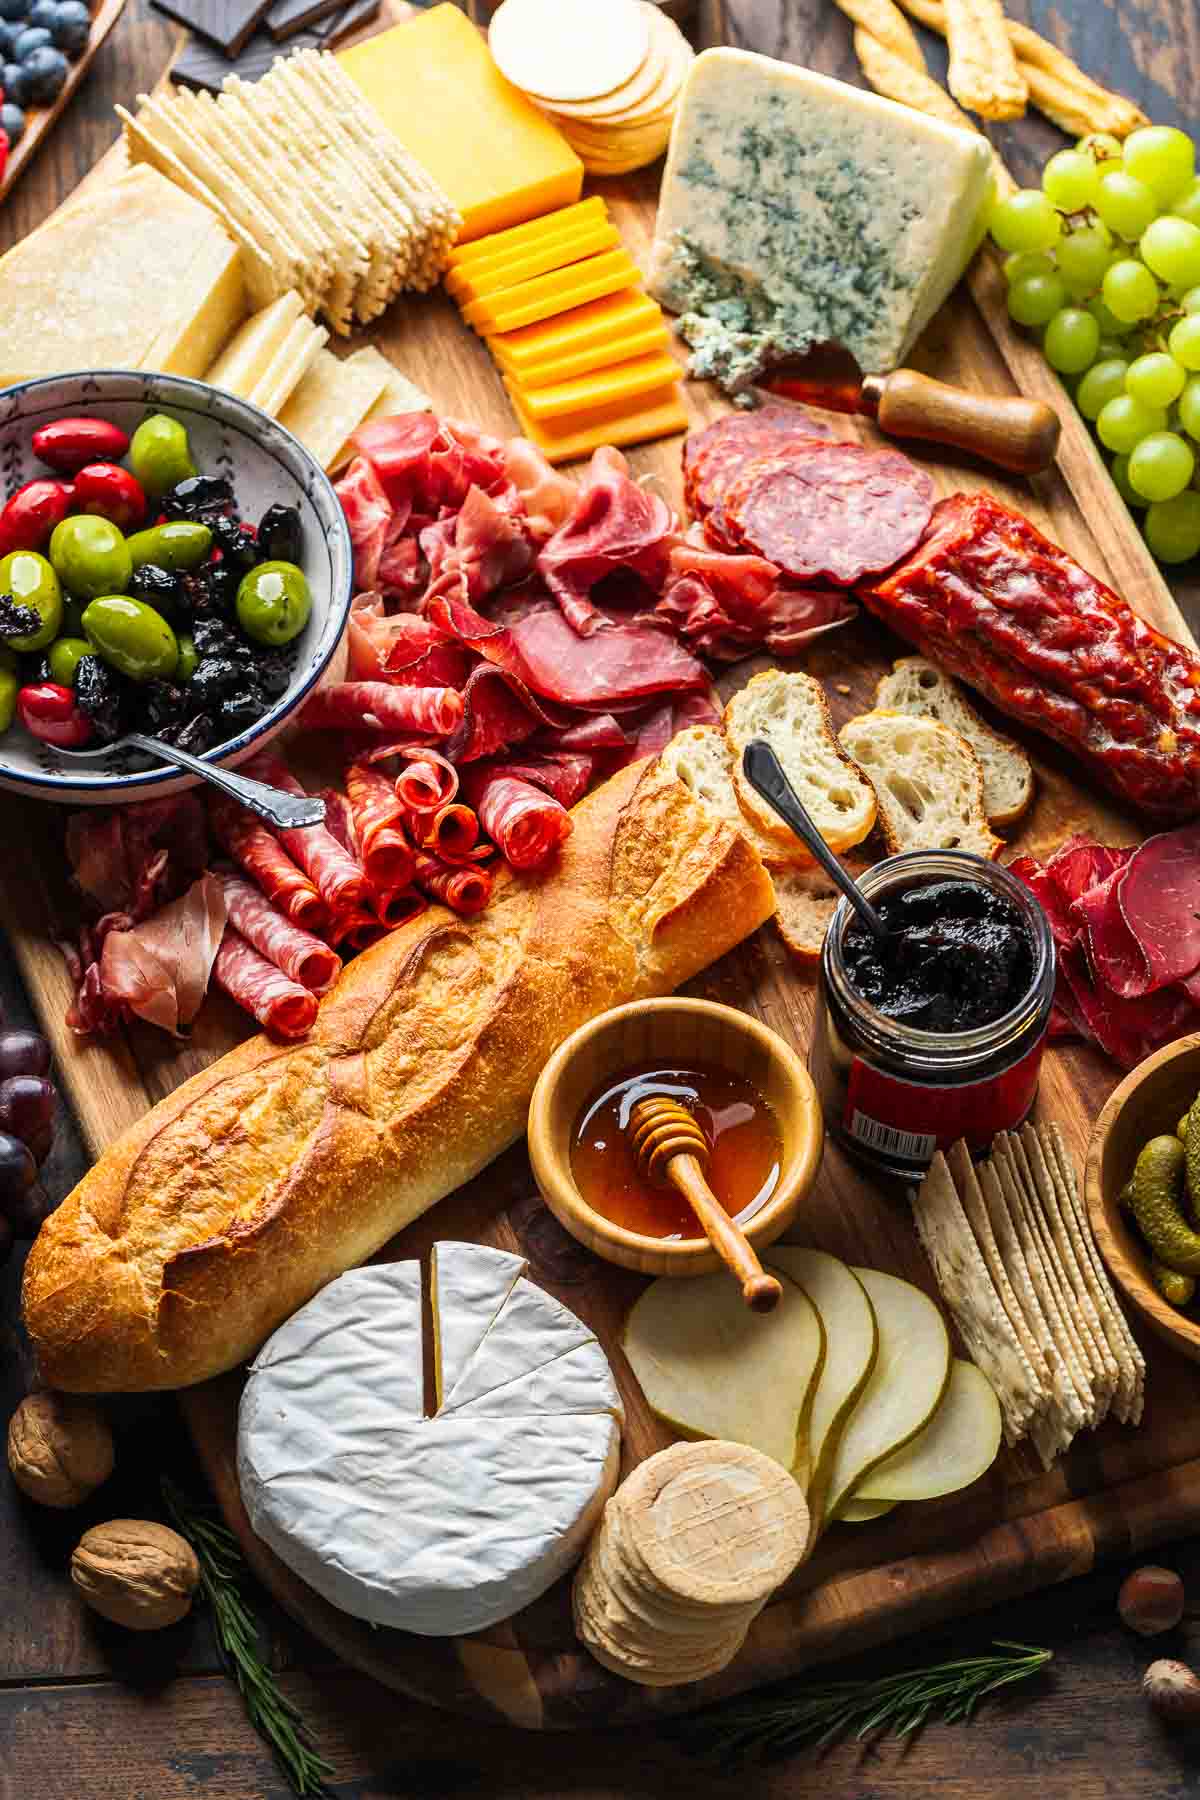 Charcuterie board with cheeses, cold cuts, olives, honey, jam, grapes, and baguette.